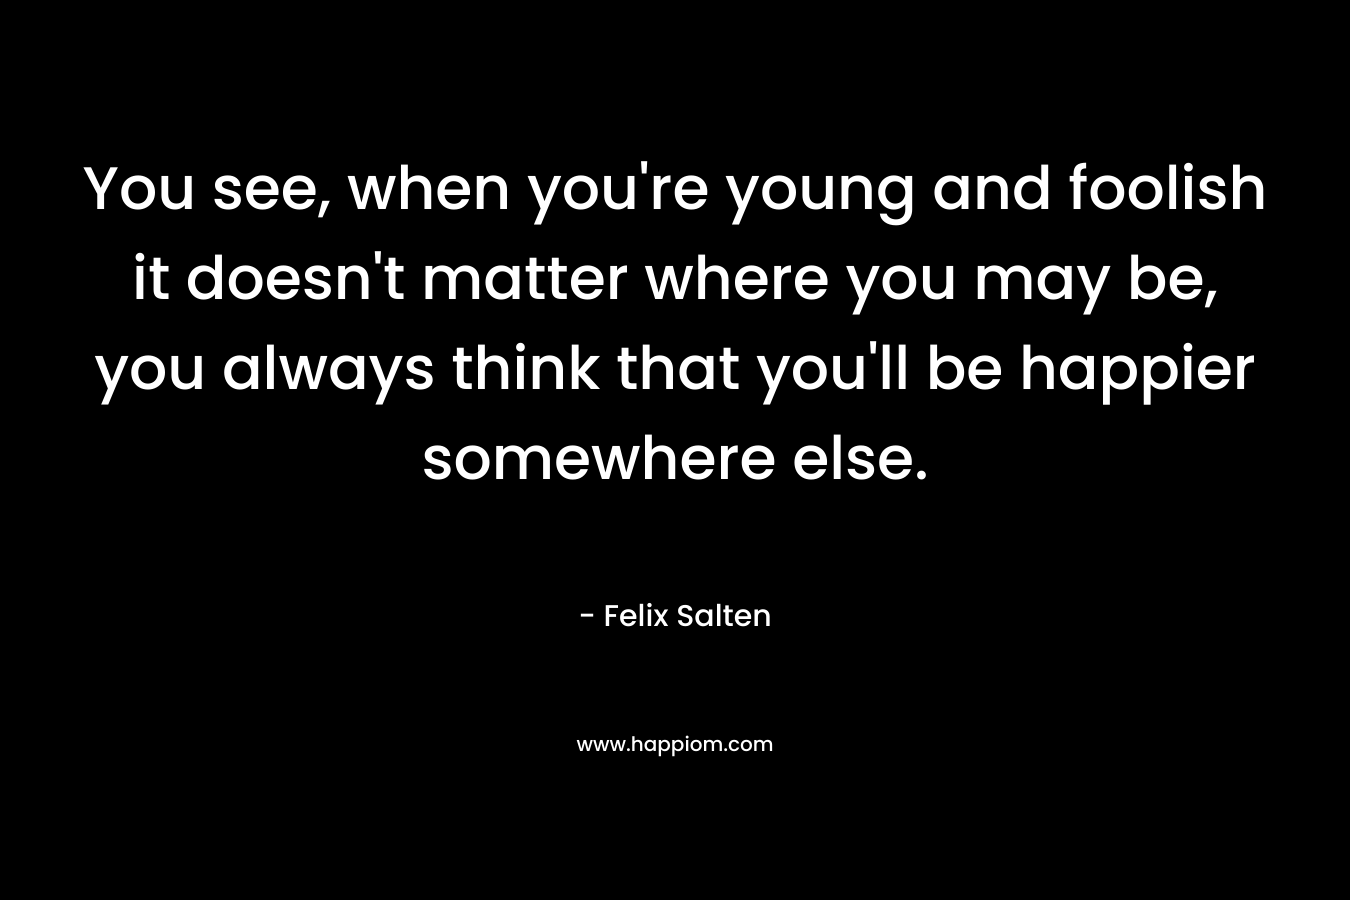 You see, when you’re young and foolish it doesn’t matter where you may be, you always think that you’ll be happier somewhere else. – Felix Salten